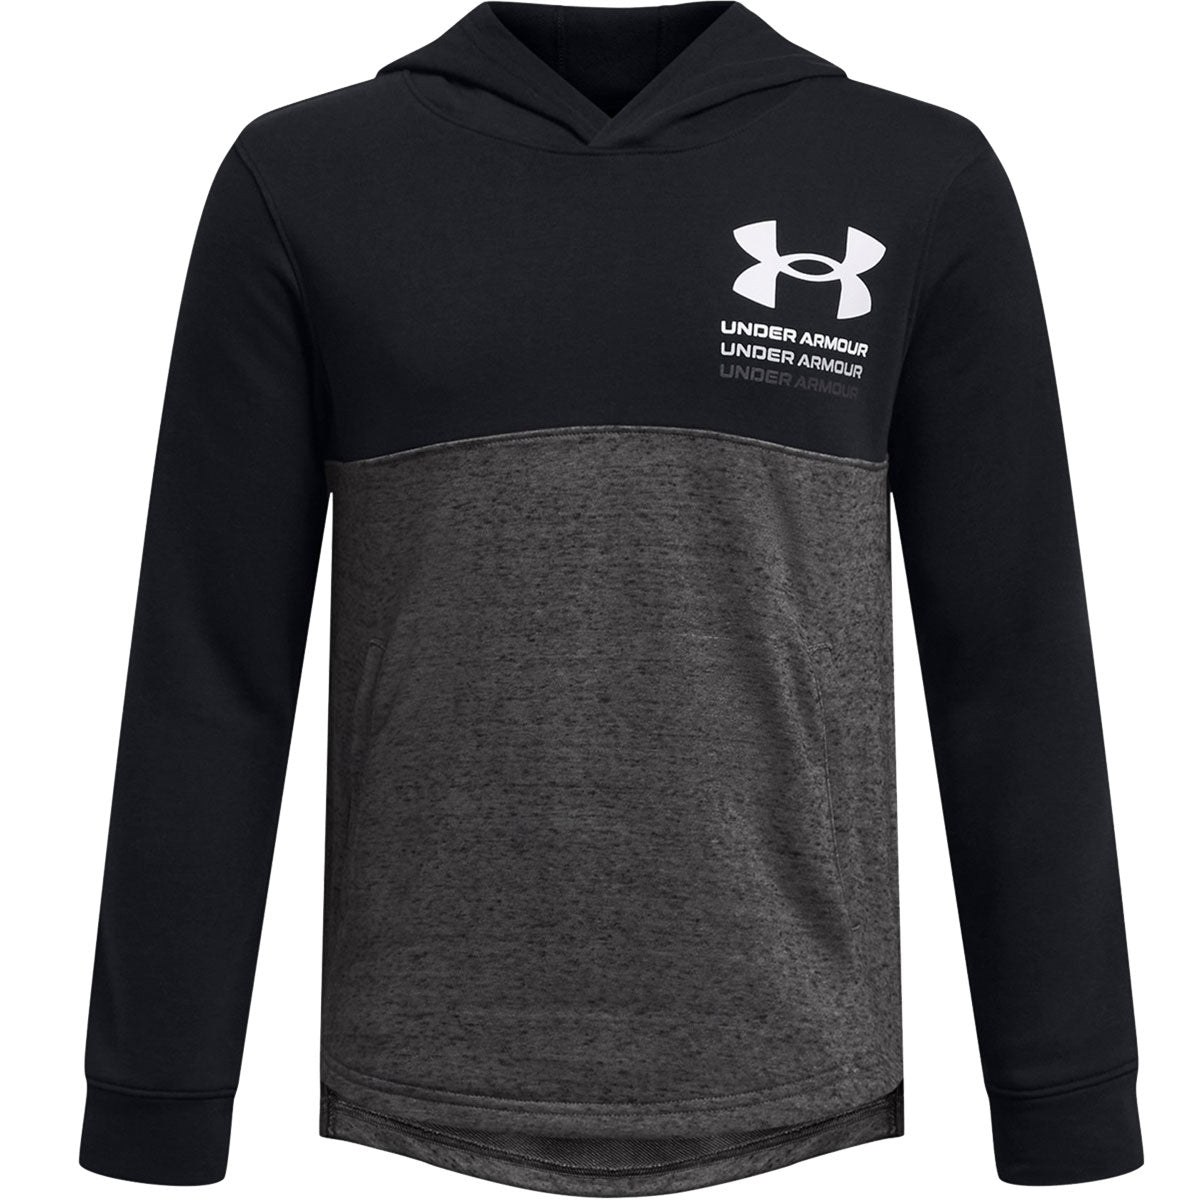 Under Armour Rival Terry Hoodie - Boys - Black/Mod Grey Light Heather/Castlerock Youth X-Small